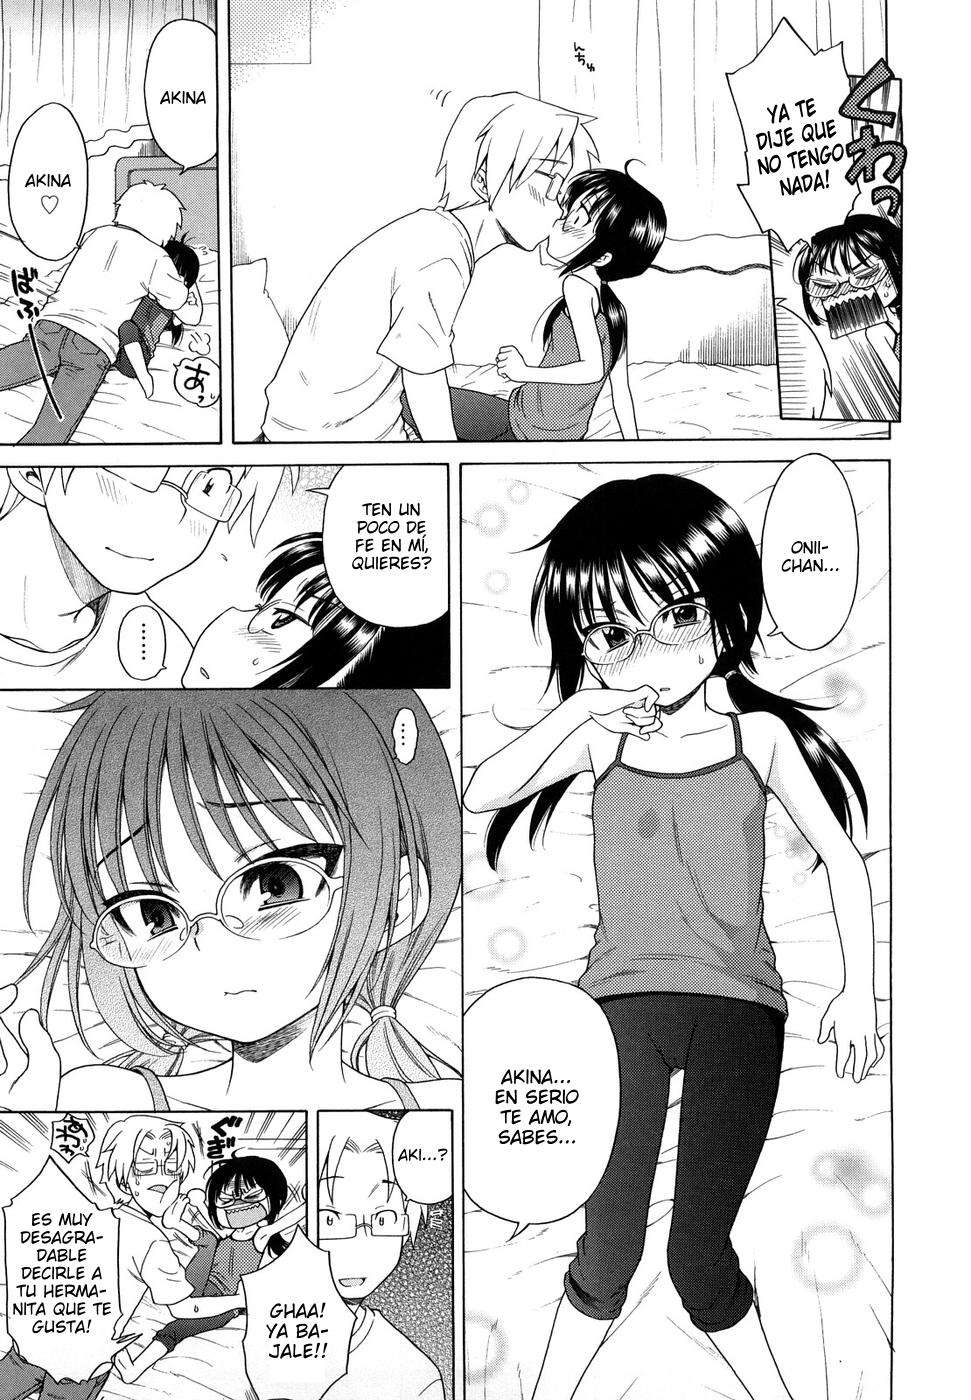 Me gustas Onii-chan! Chapter-10 - 9